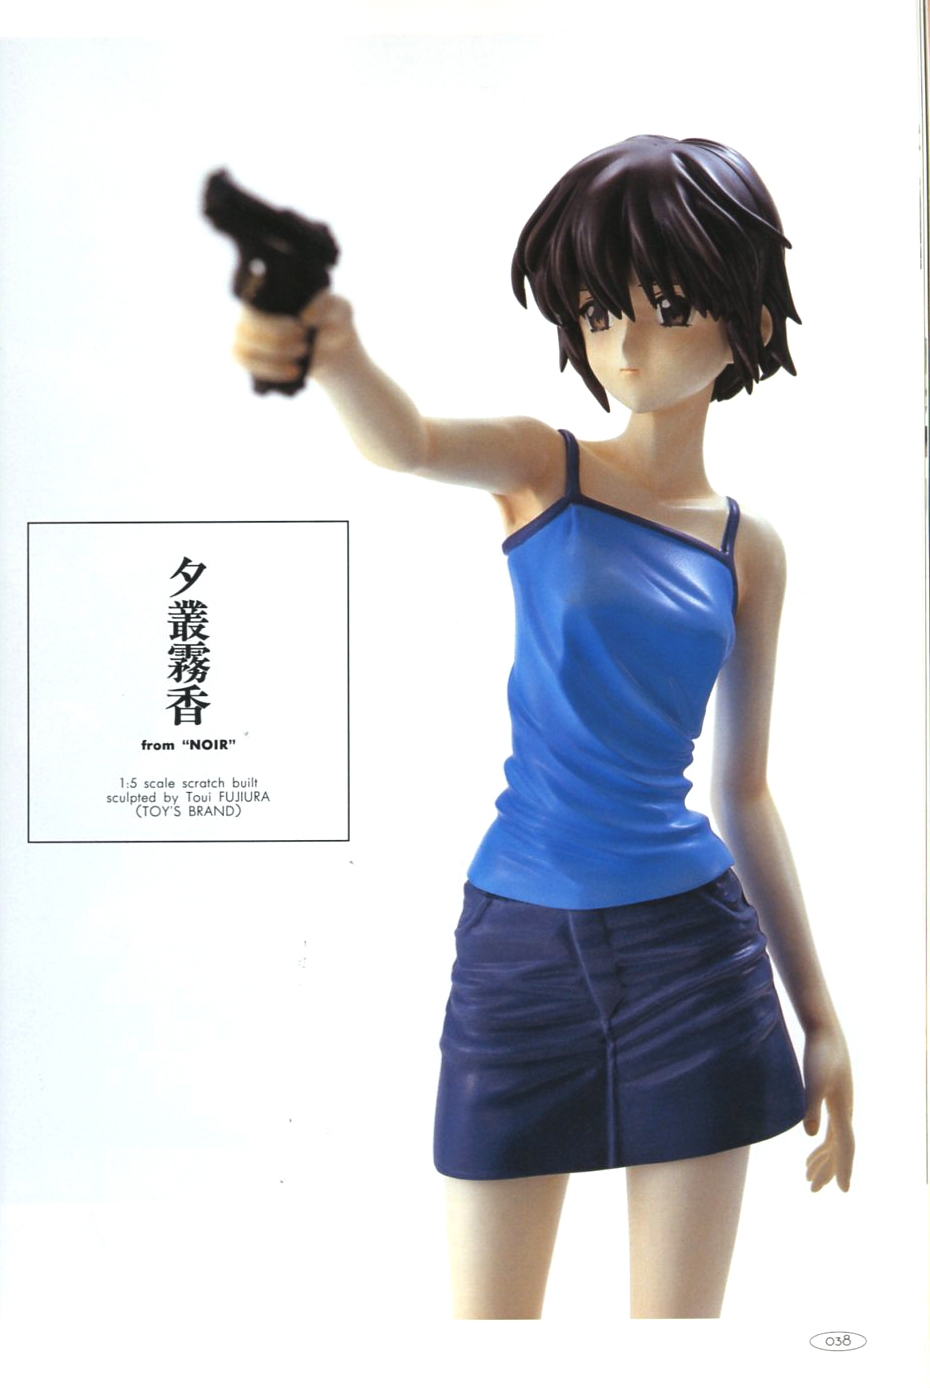 Hobby Japan Mook All That Figure 2001 31